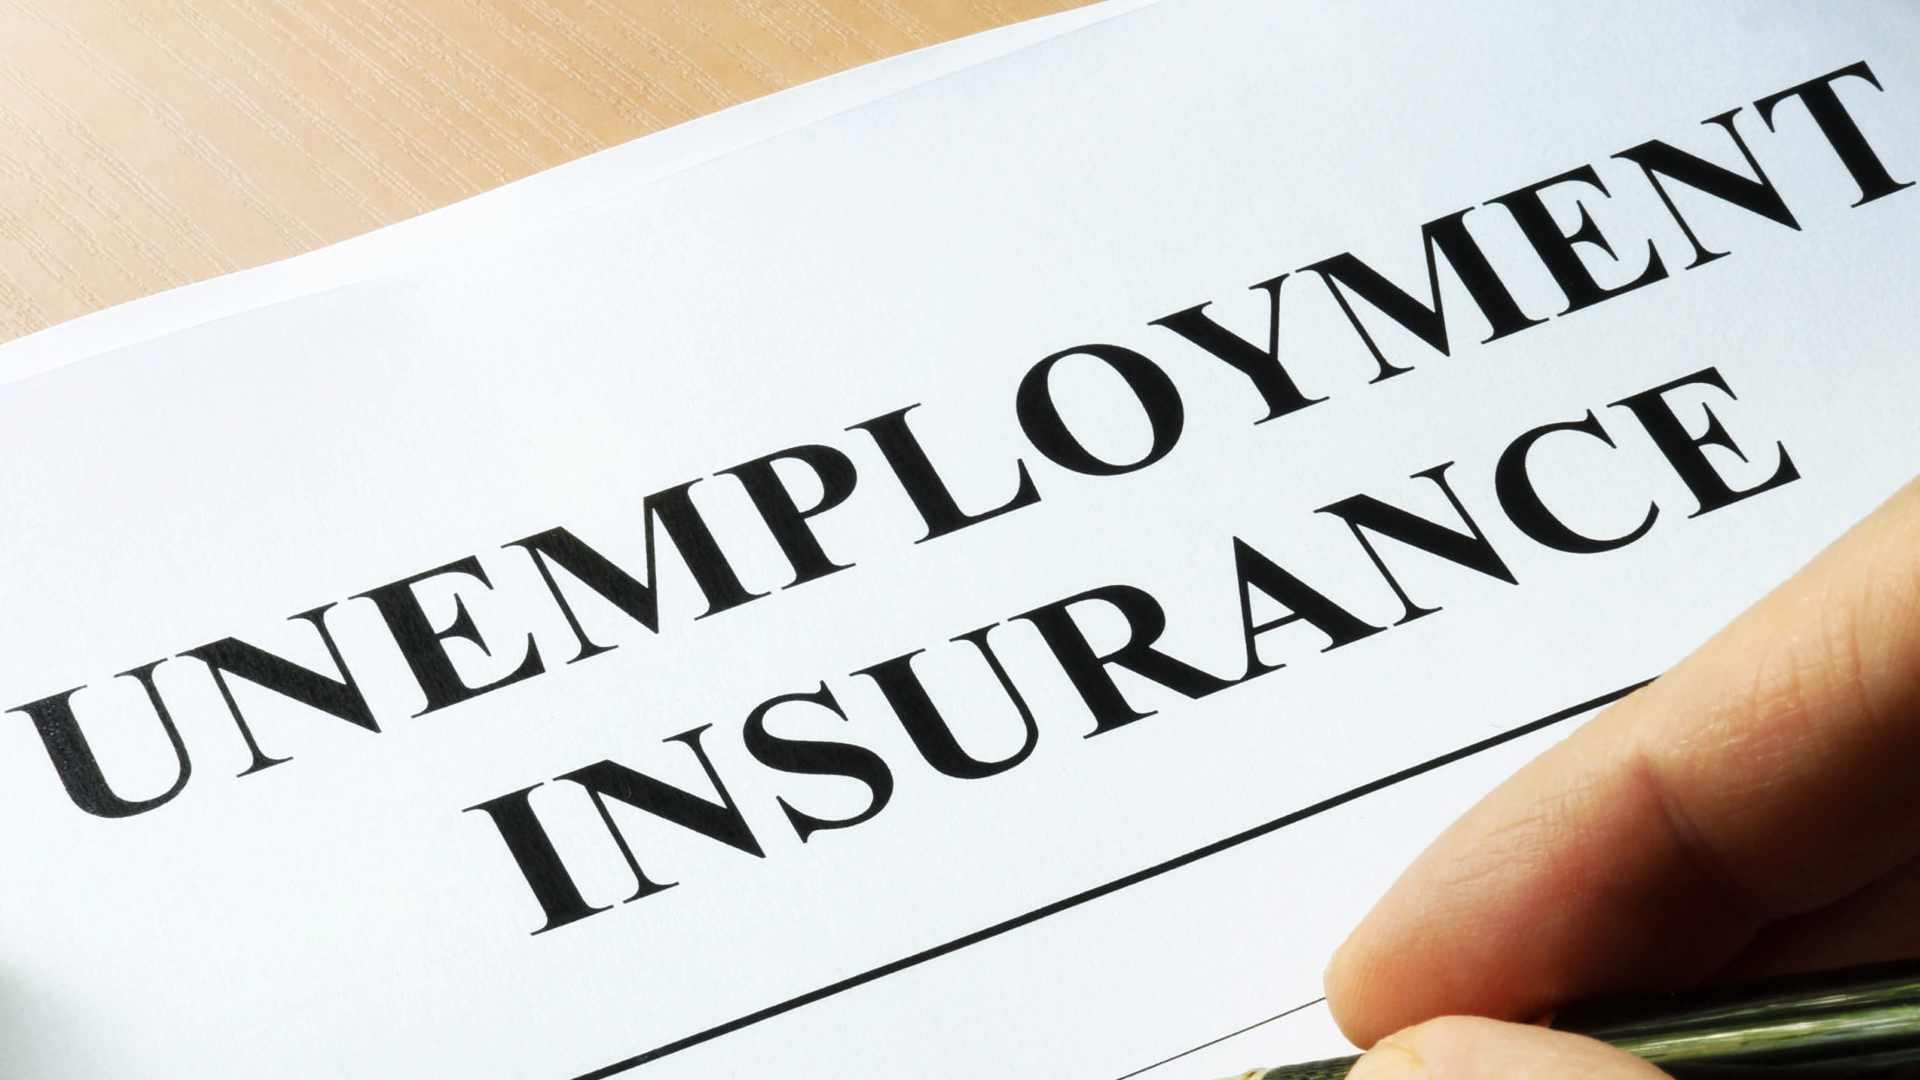 Unemployment Insurance in the UAE